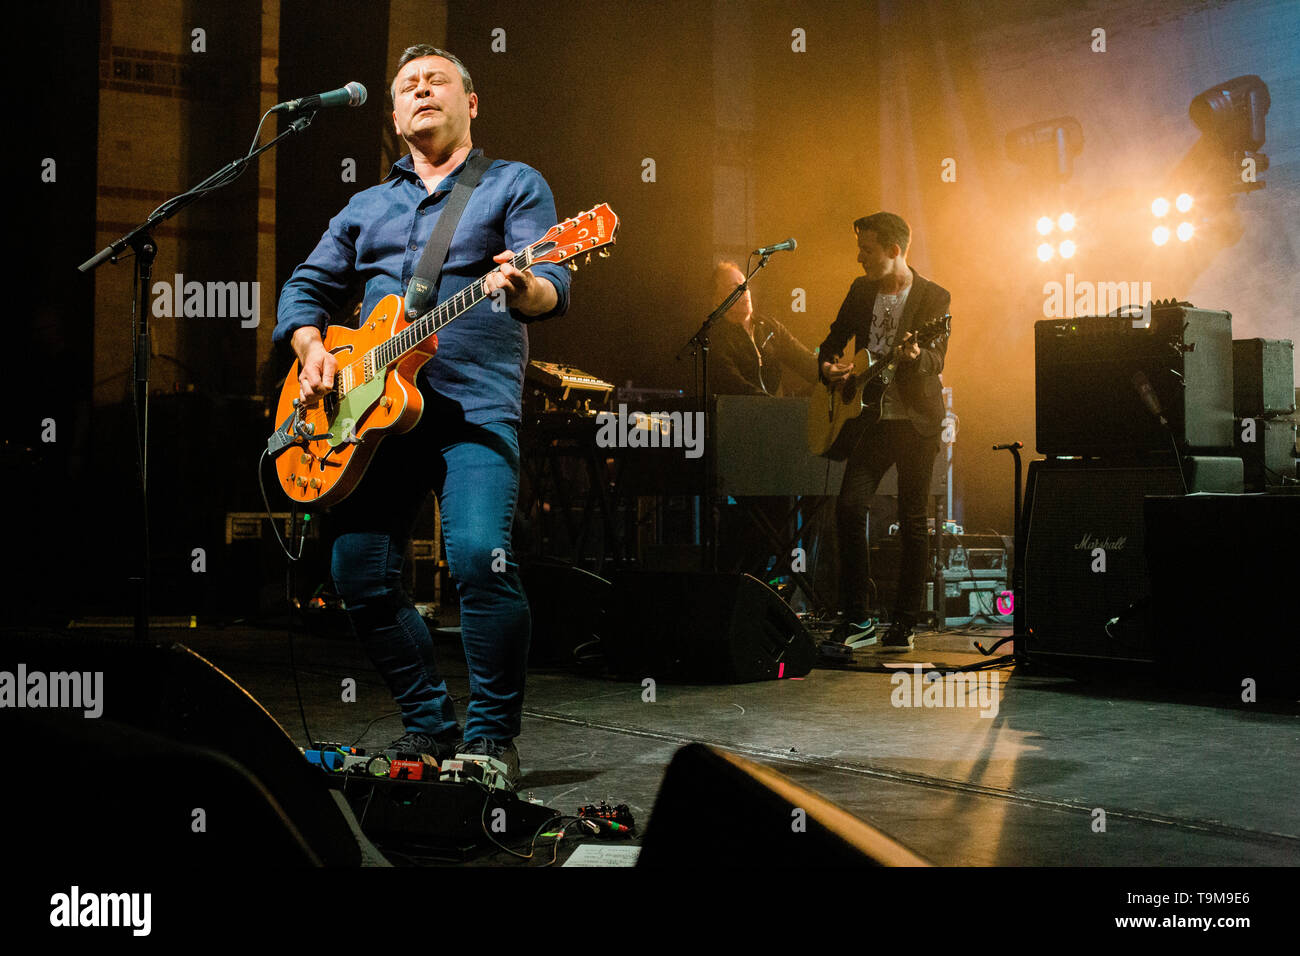 Cambridge, UK. 14th May 2019. Manic Street Preachers performs at the Cambridge Corn Exchange on their anniversary tour of the album This Is My Truth Tell Me Yours. Richard Etteridge / Alamy Live News Stock Photo